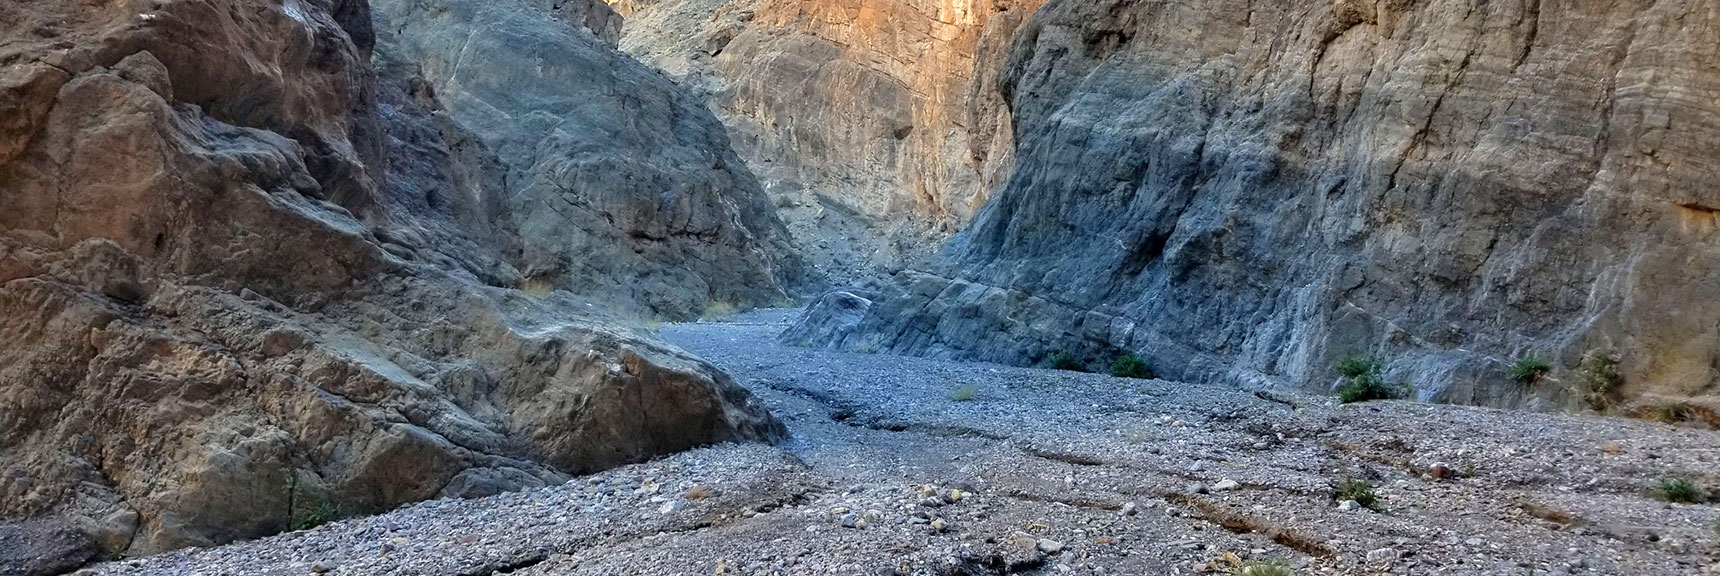 In the More Narrow Section Flash Flood Water and Debris Smooth and Polish the Walls | Fall Canyon | Death Valley National Park, California